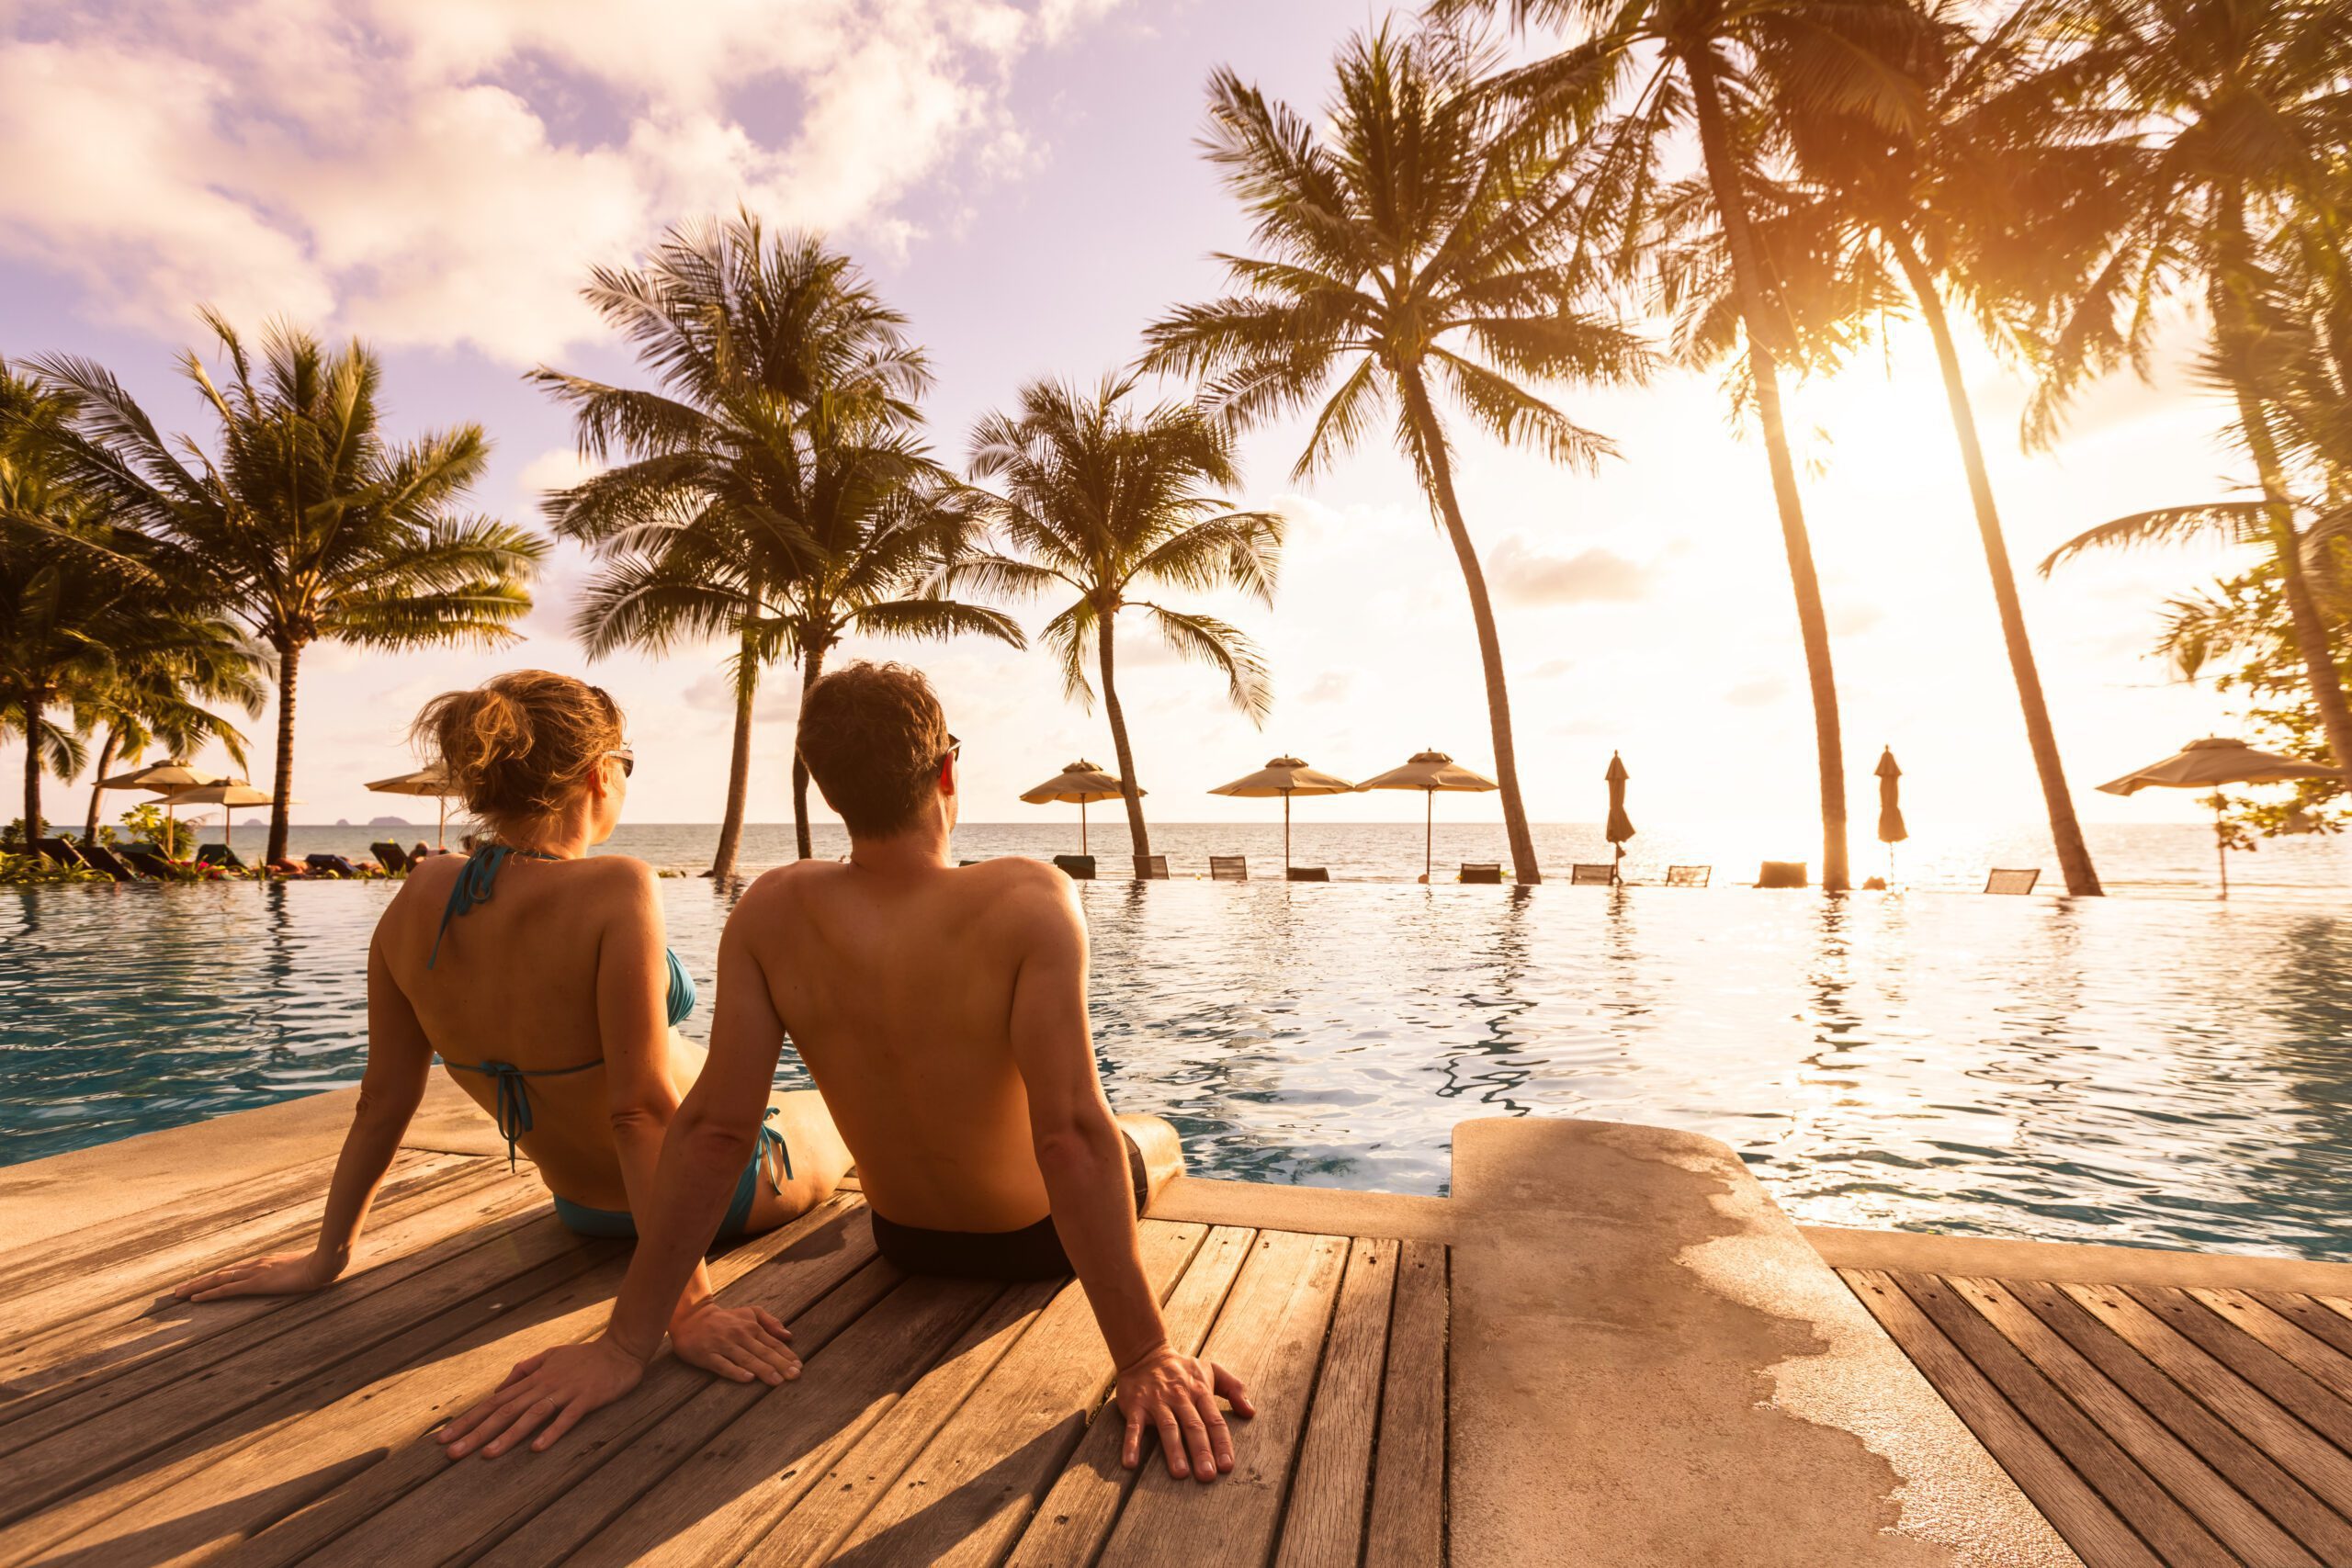 Couple enjoying beach vacation holidays at tropical resort with swimming pool and coconut palm trees near the coast with beautiful landscape at sunset, honeymoon destination